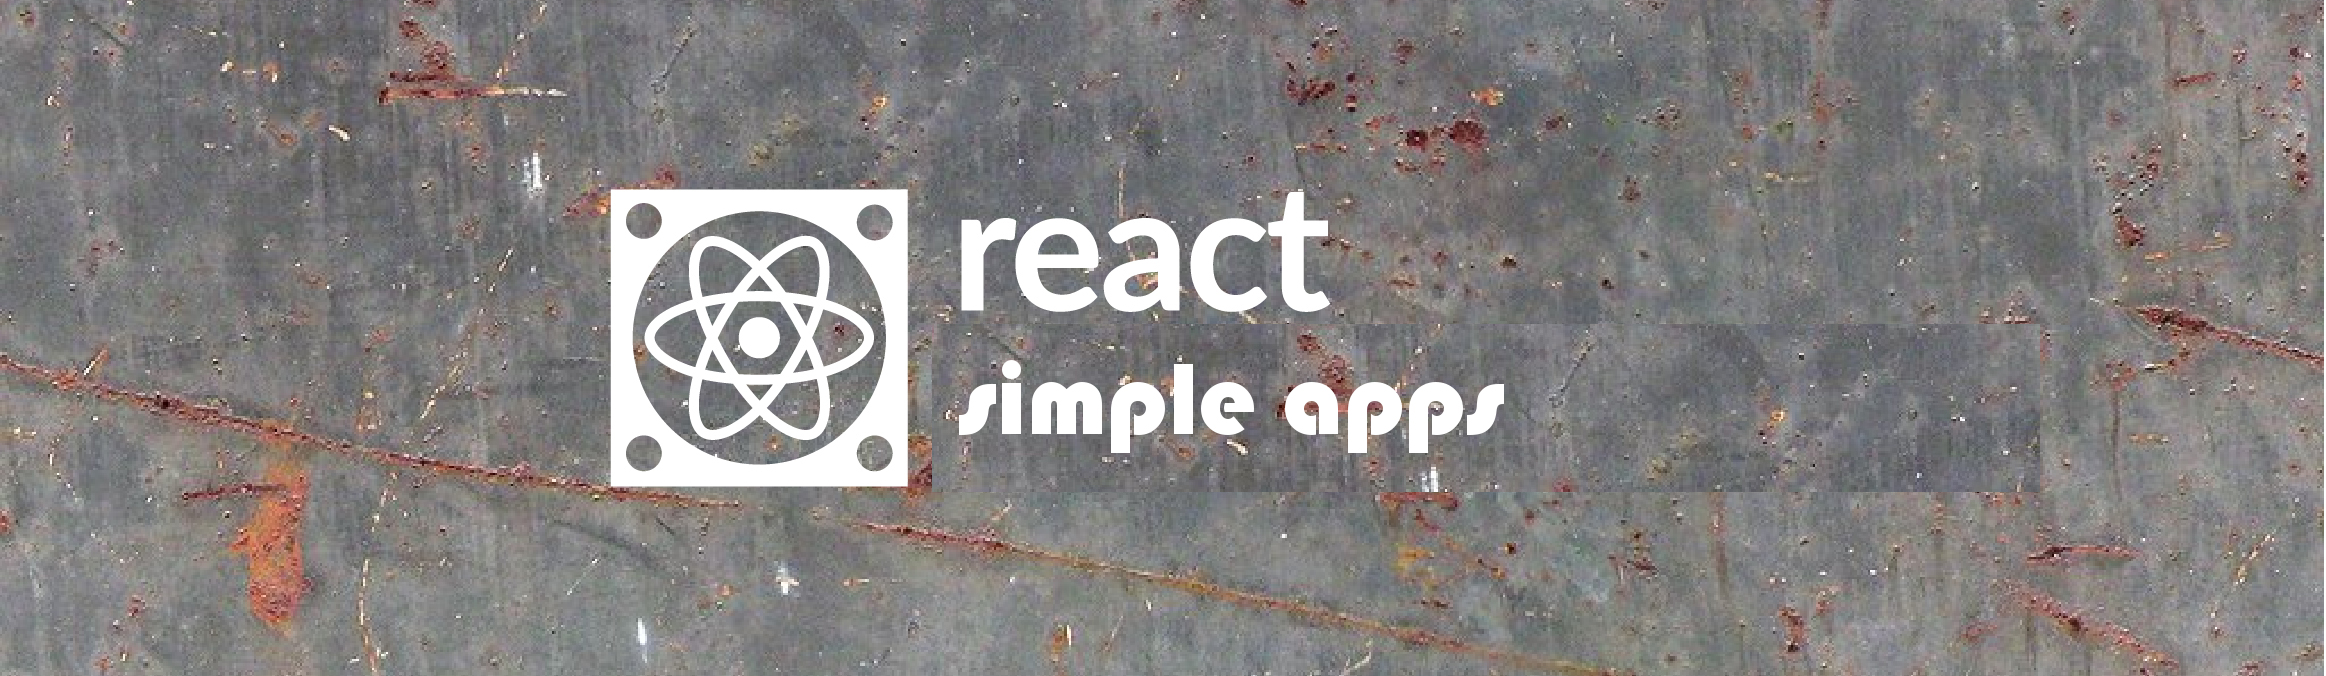 react simple apps